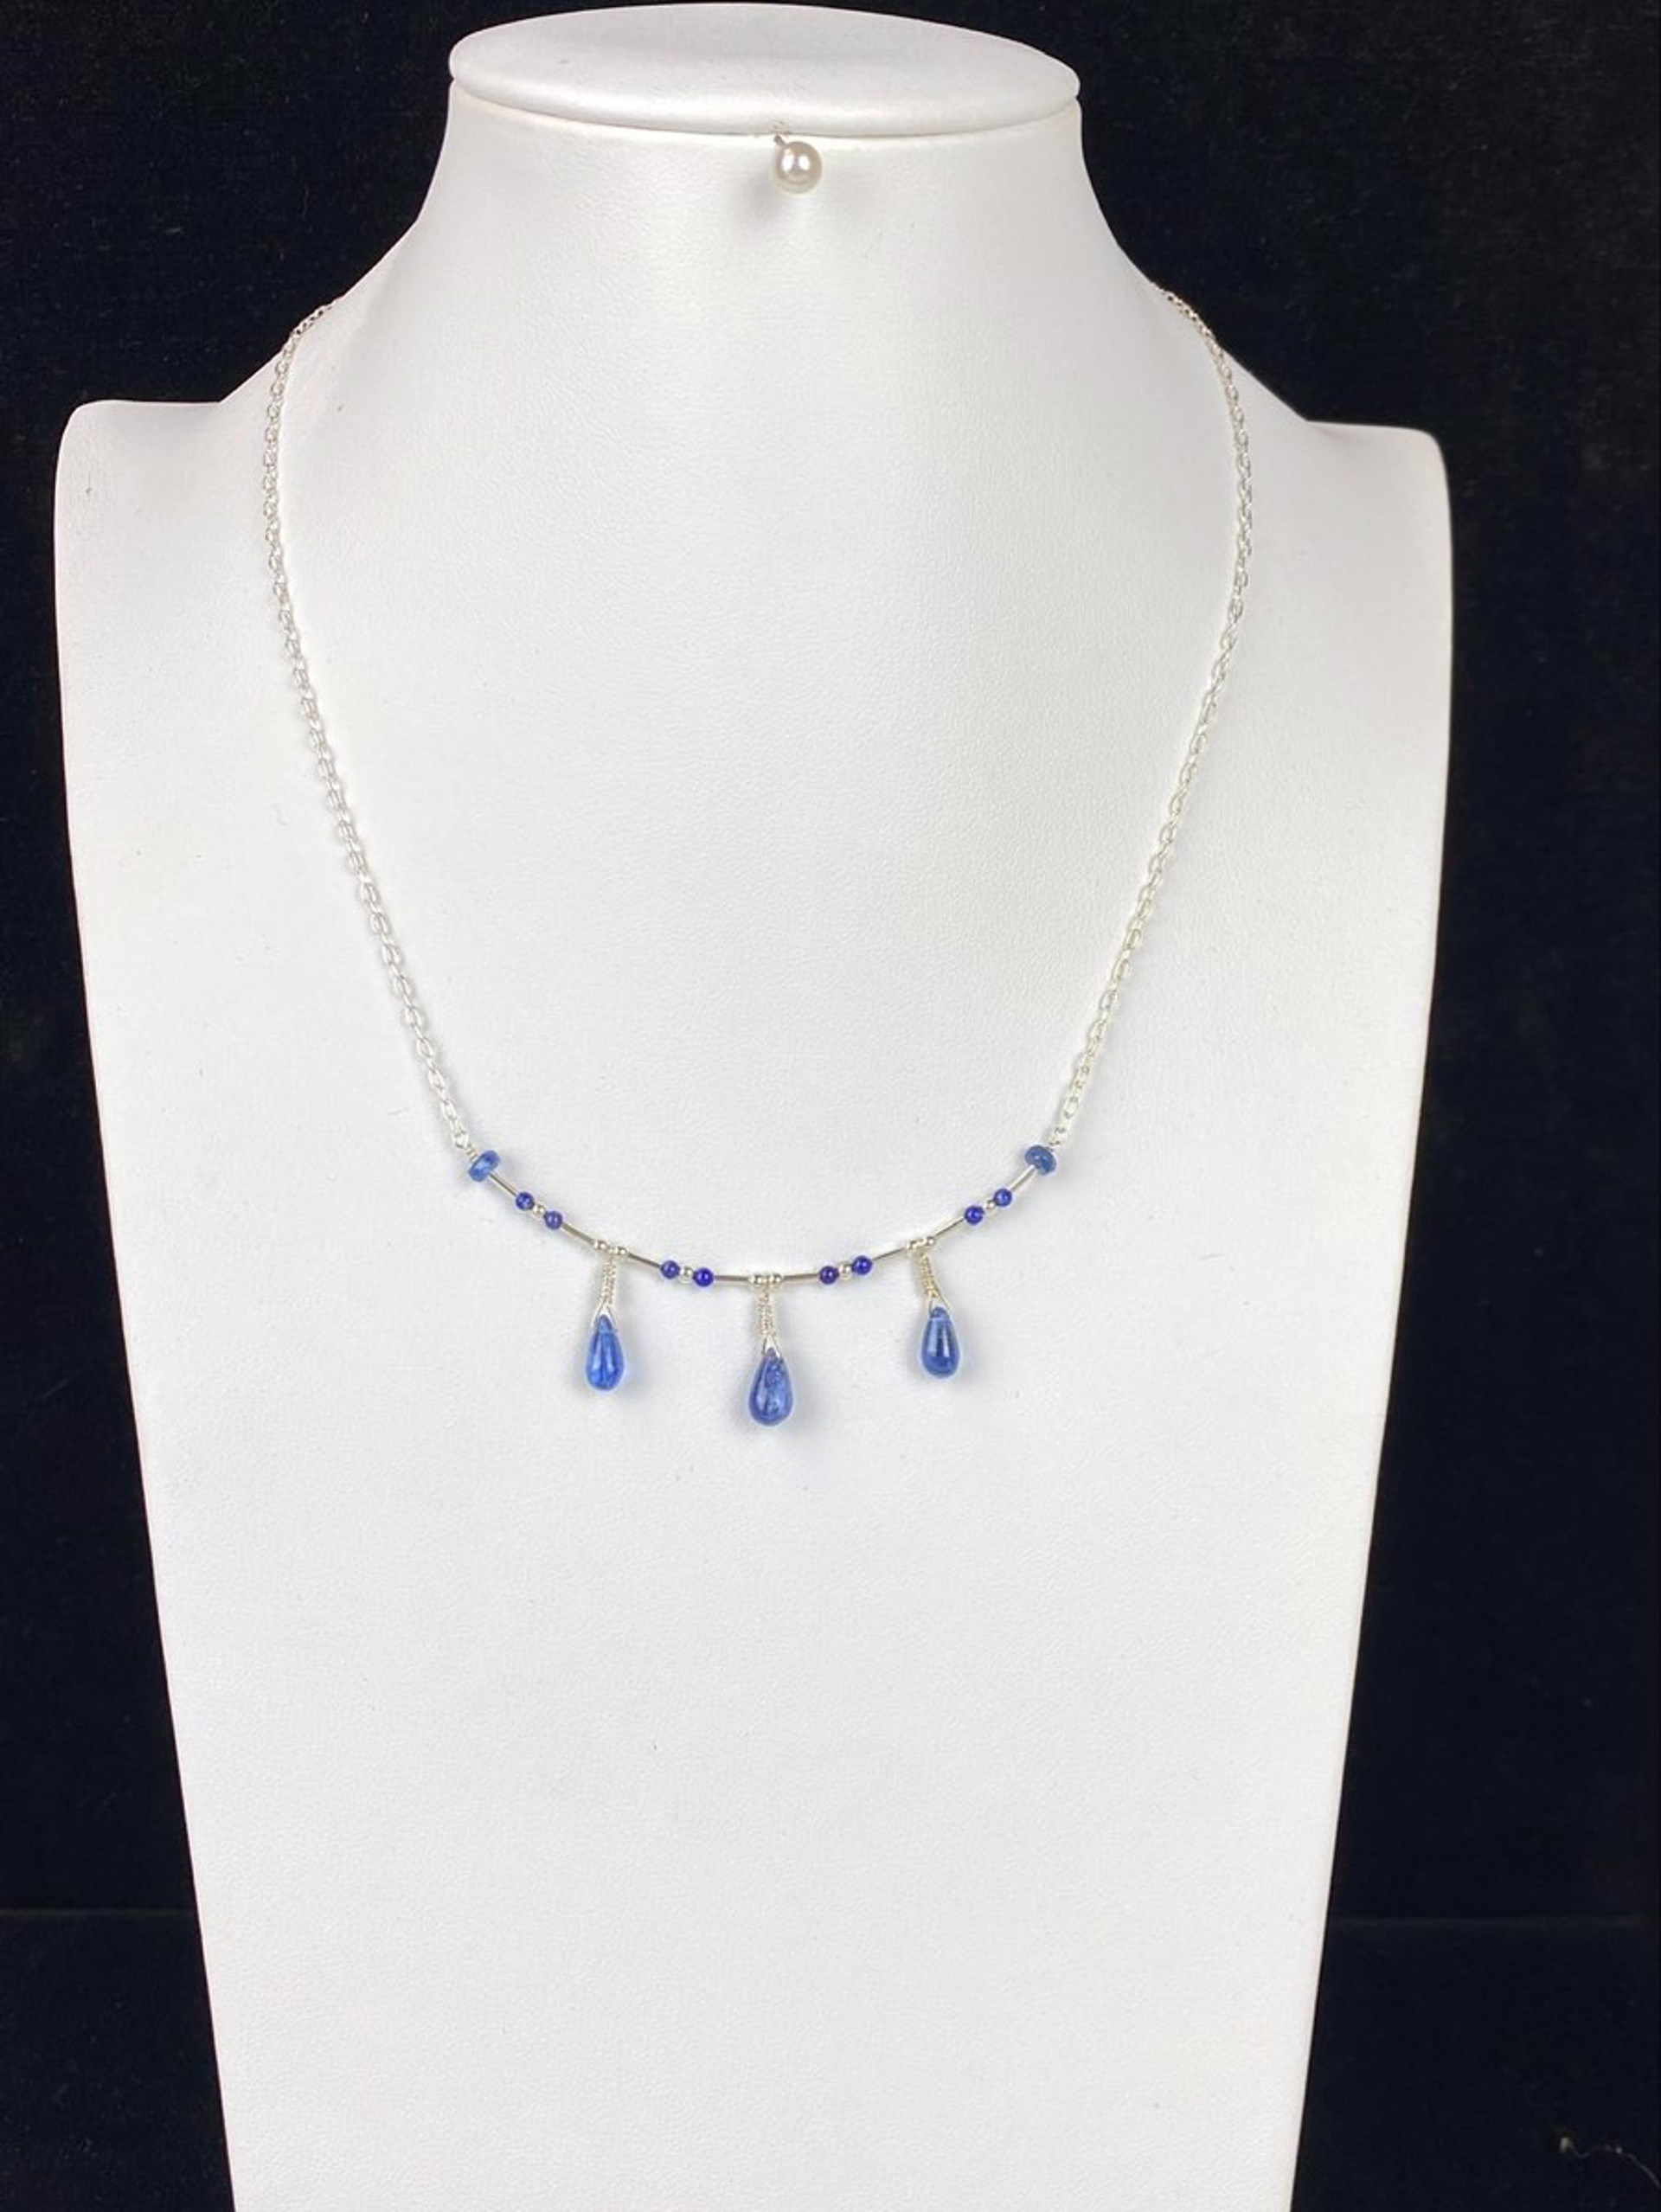 Kyanite, Lapis, and Sterling Silver Fringe Necklace by Lisa Kelley